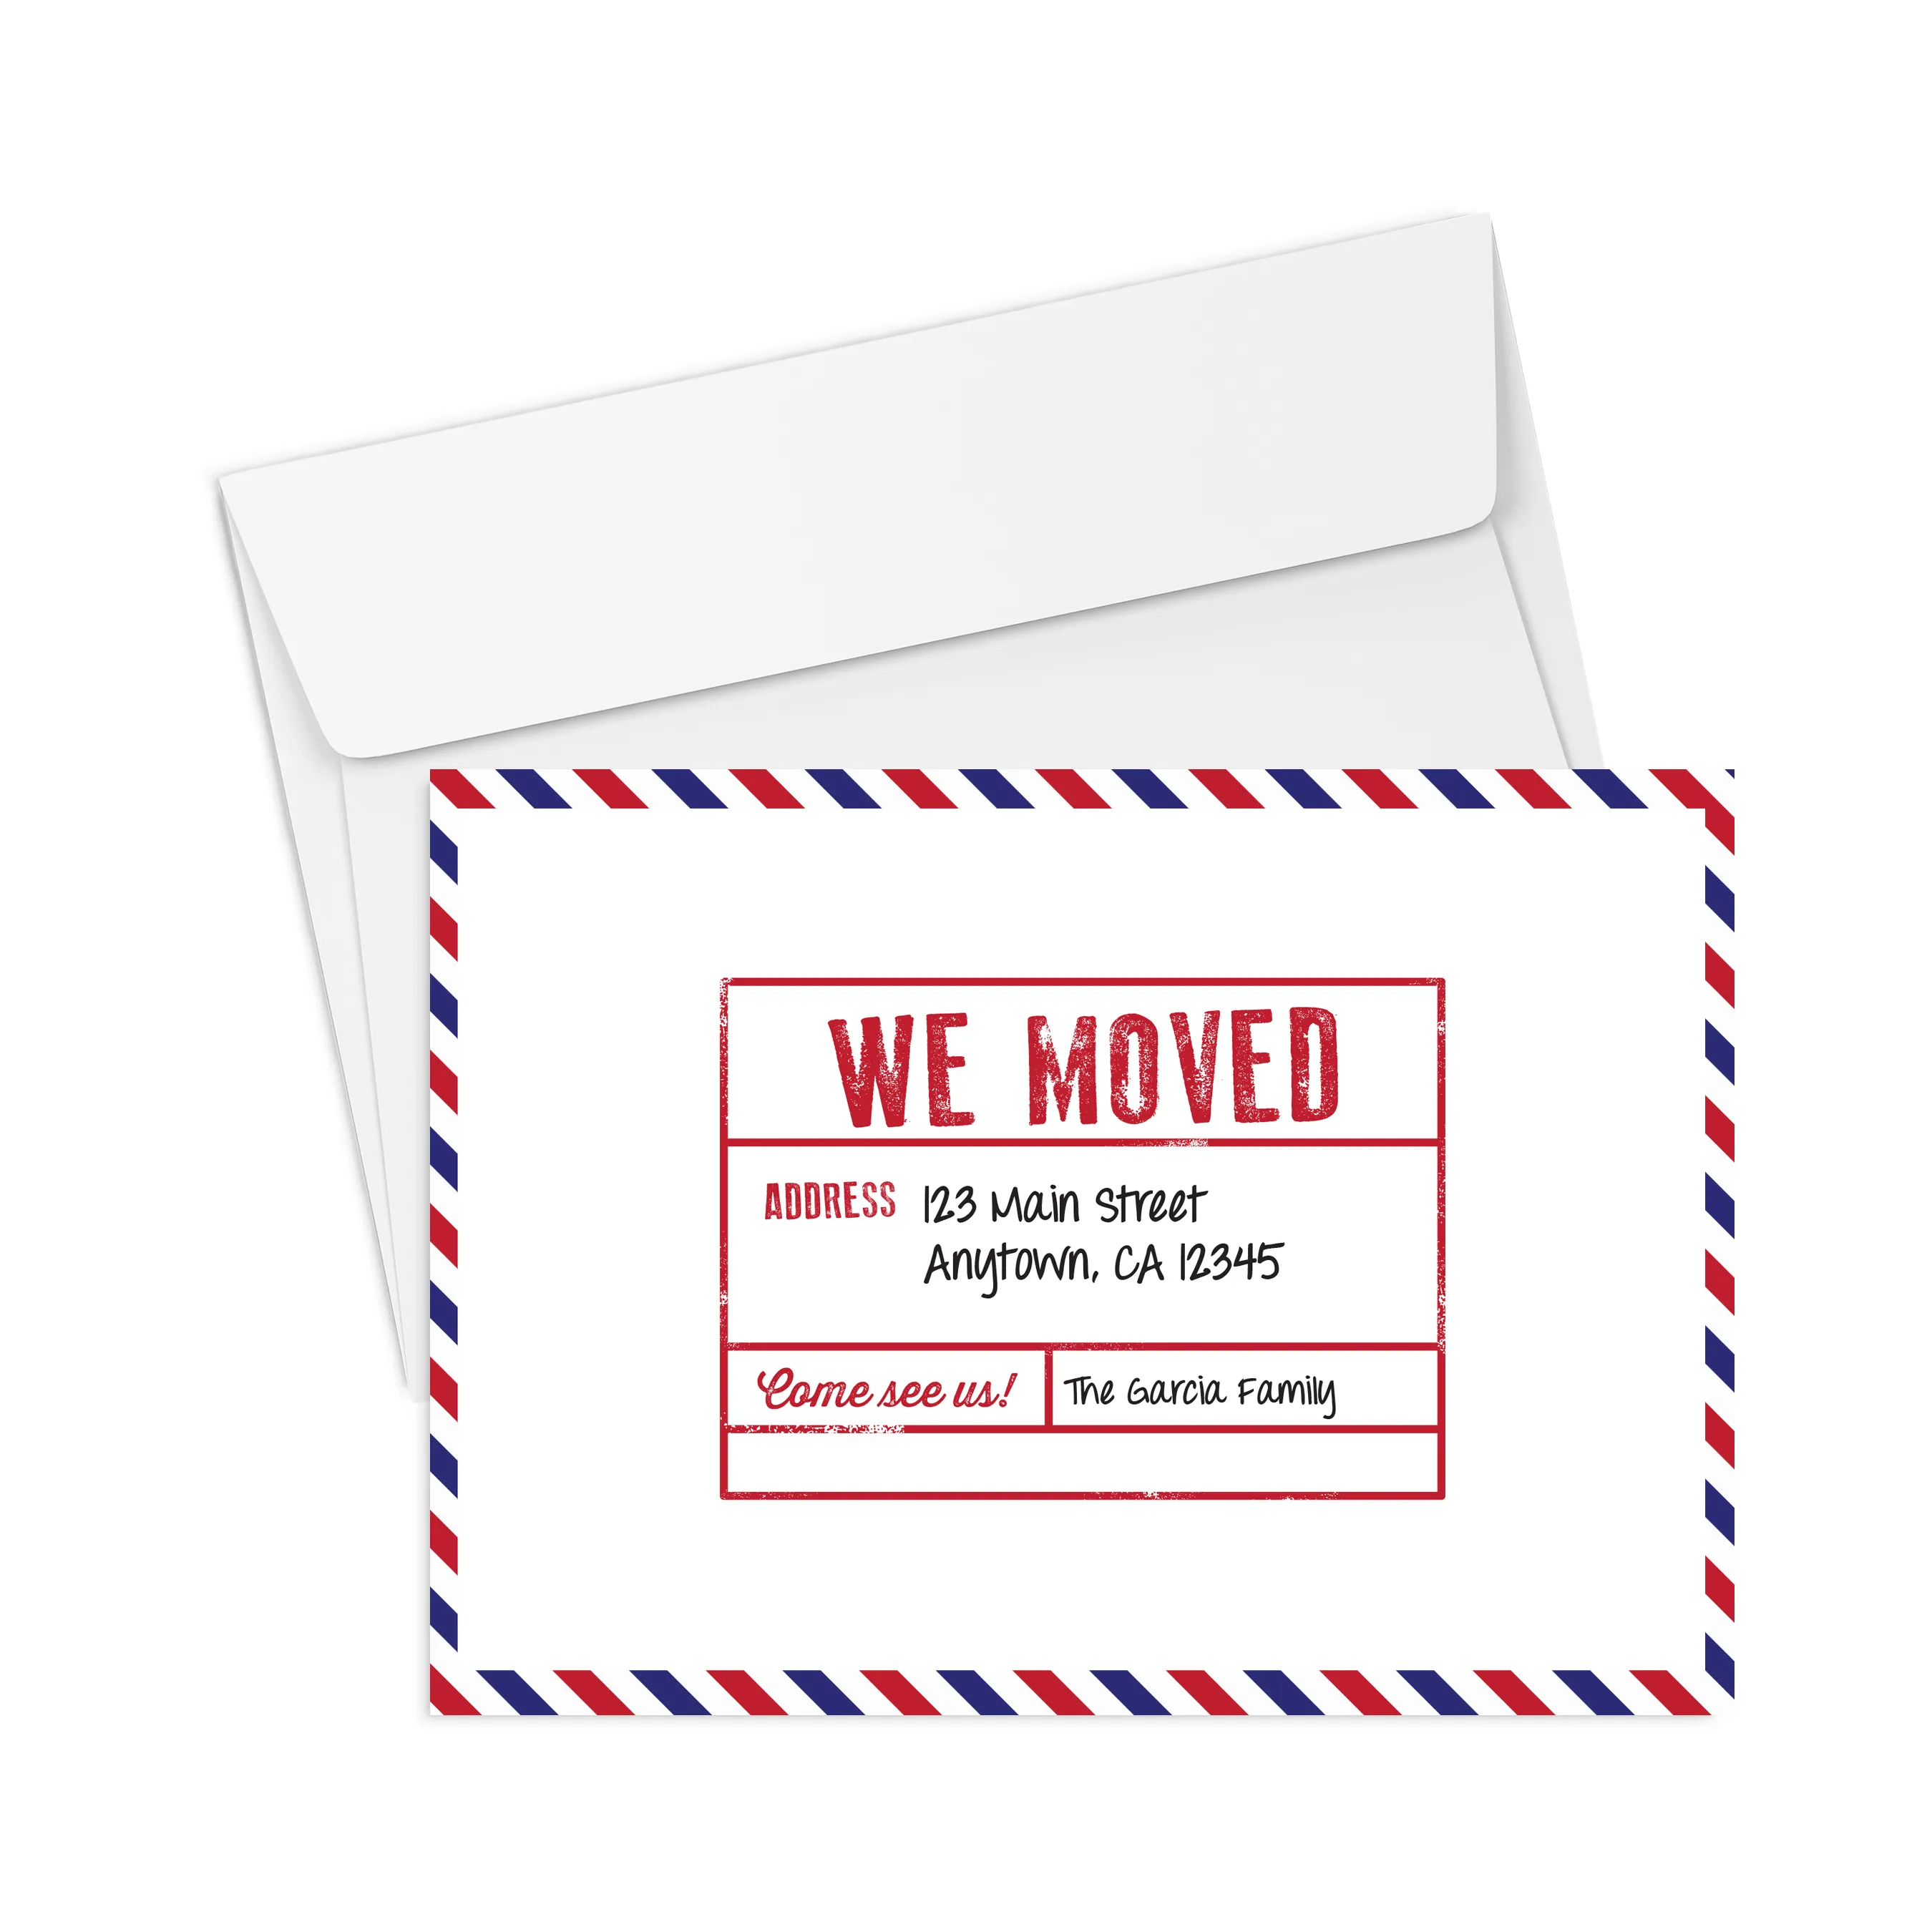 We Moved - Postmarked